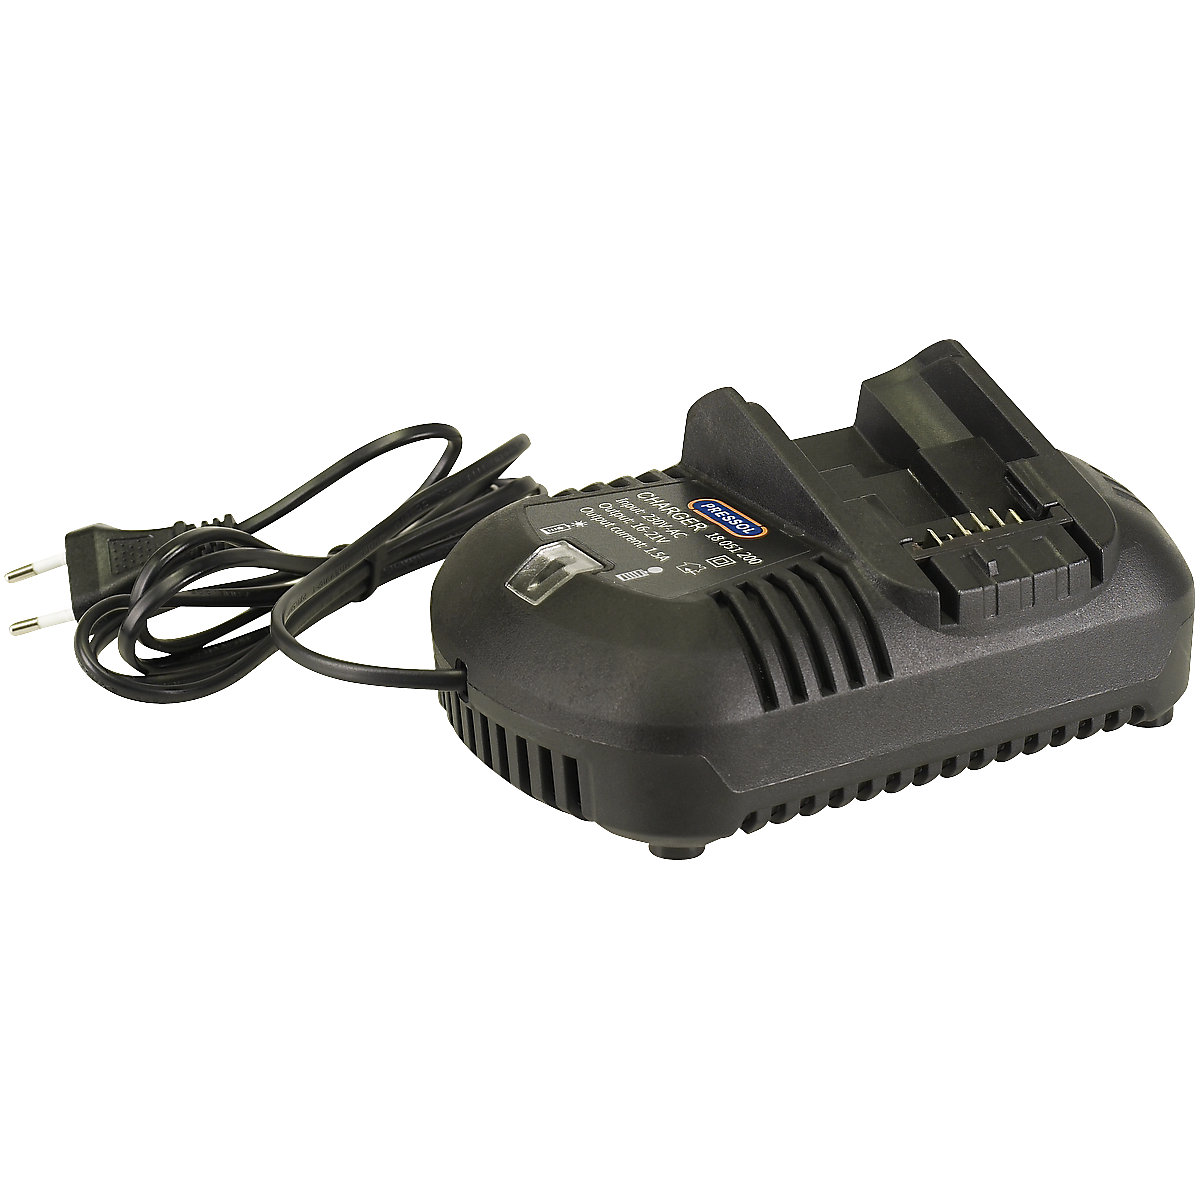 Battery charger - PRESSOL